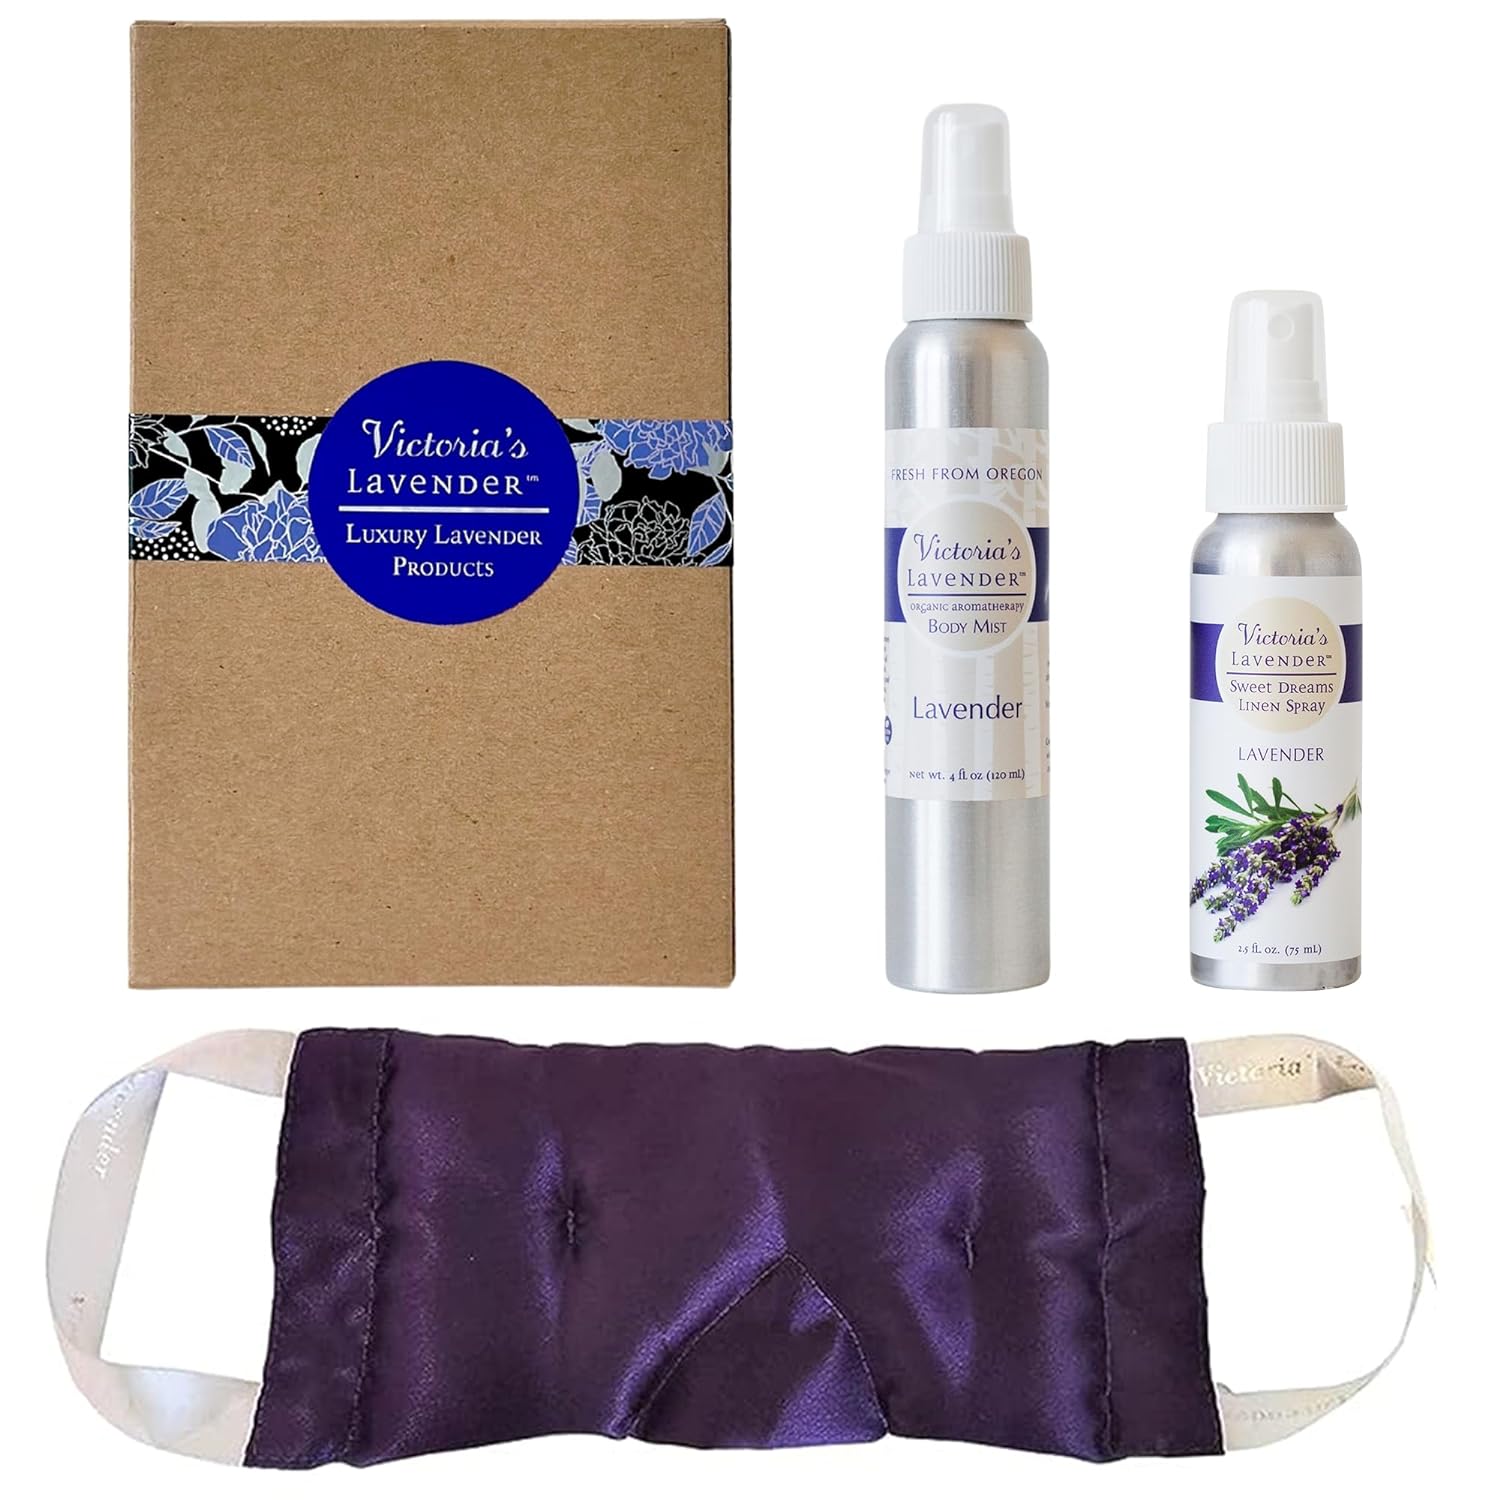 Victorias Lavender Luxury Microwavable Aromatherapy Lavender Neck Wrap Provides Stress and Neck Pain Relief with Organic Lavender Buds and Flax Seed, Extra Long, Excellent Gift for Relaxation